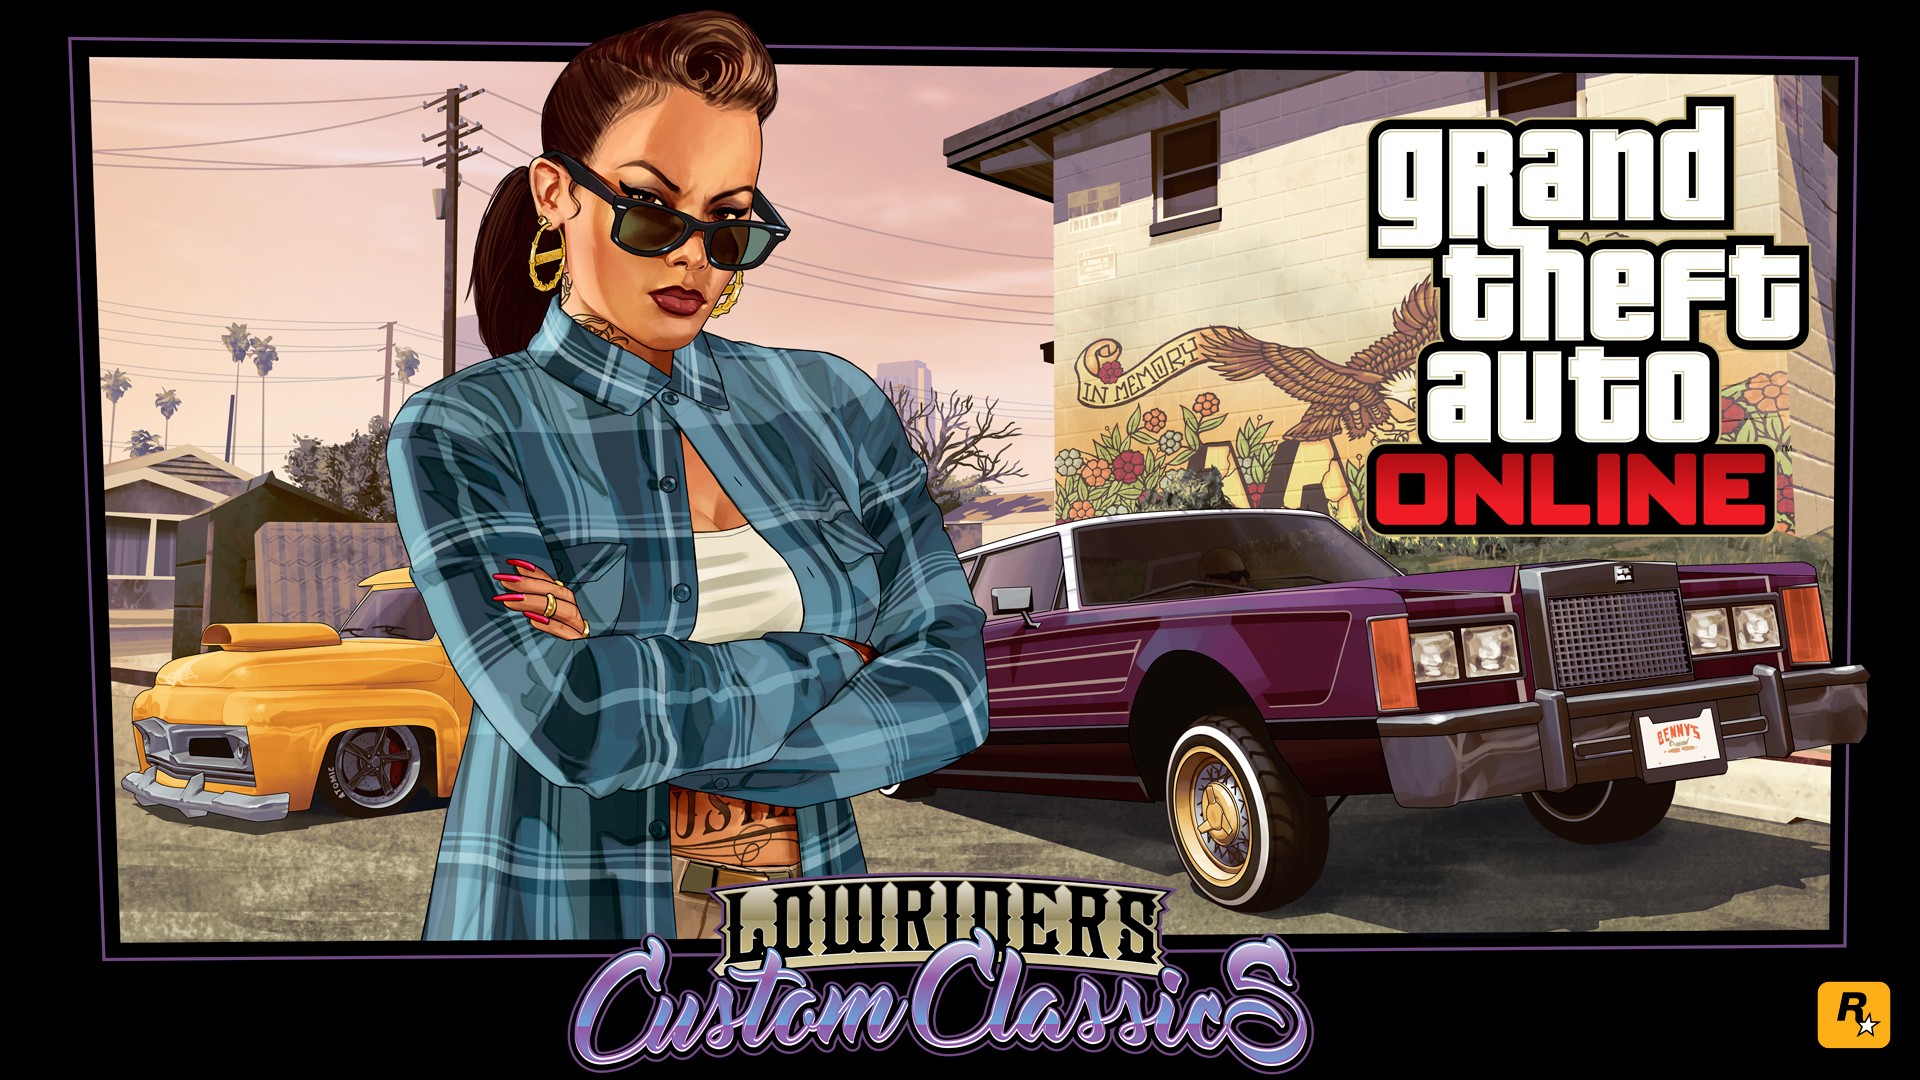 General 1920x1080 low car Grand Theft Auto V Rockstar Games tattoo Grand Theft Auto Online video games logo video game girls women with shades sunglasses arms crossed PC gaming